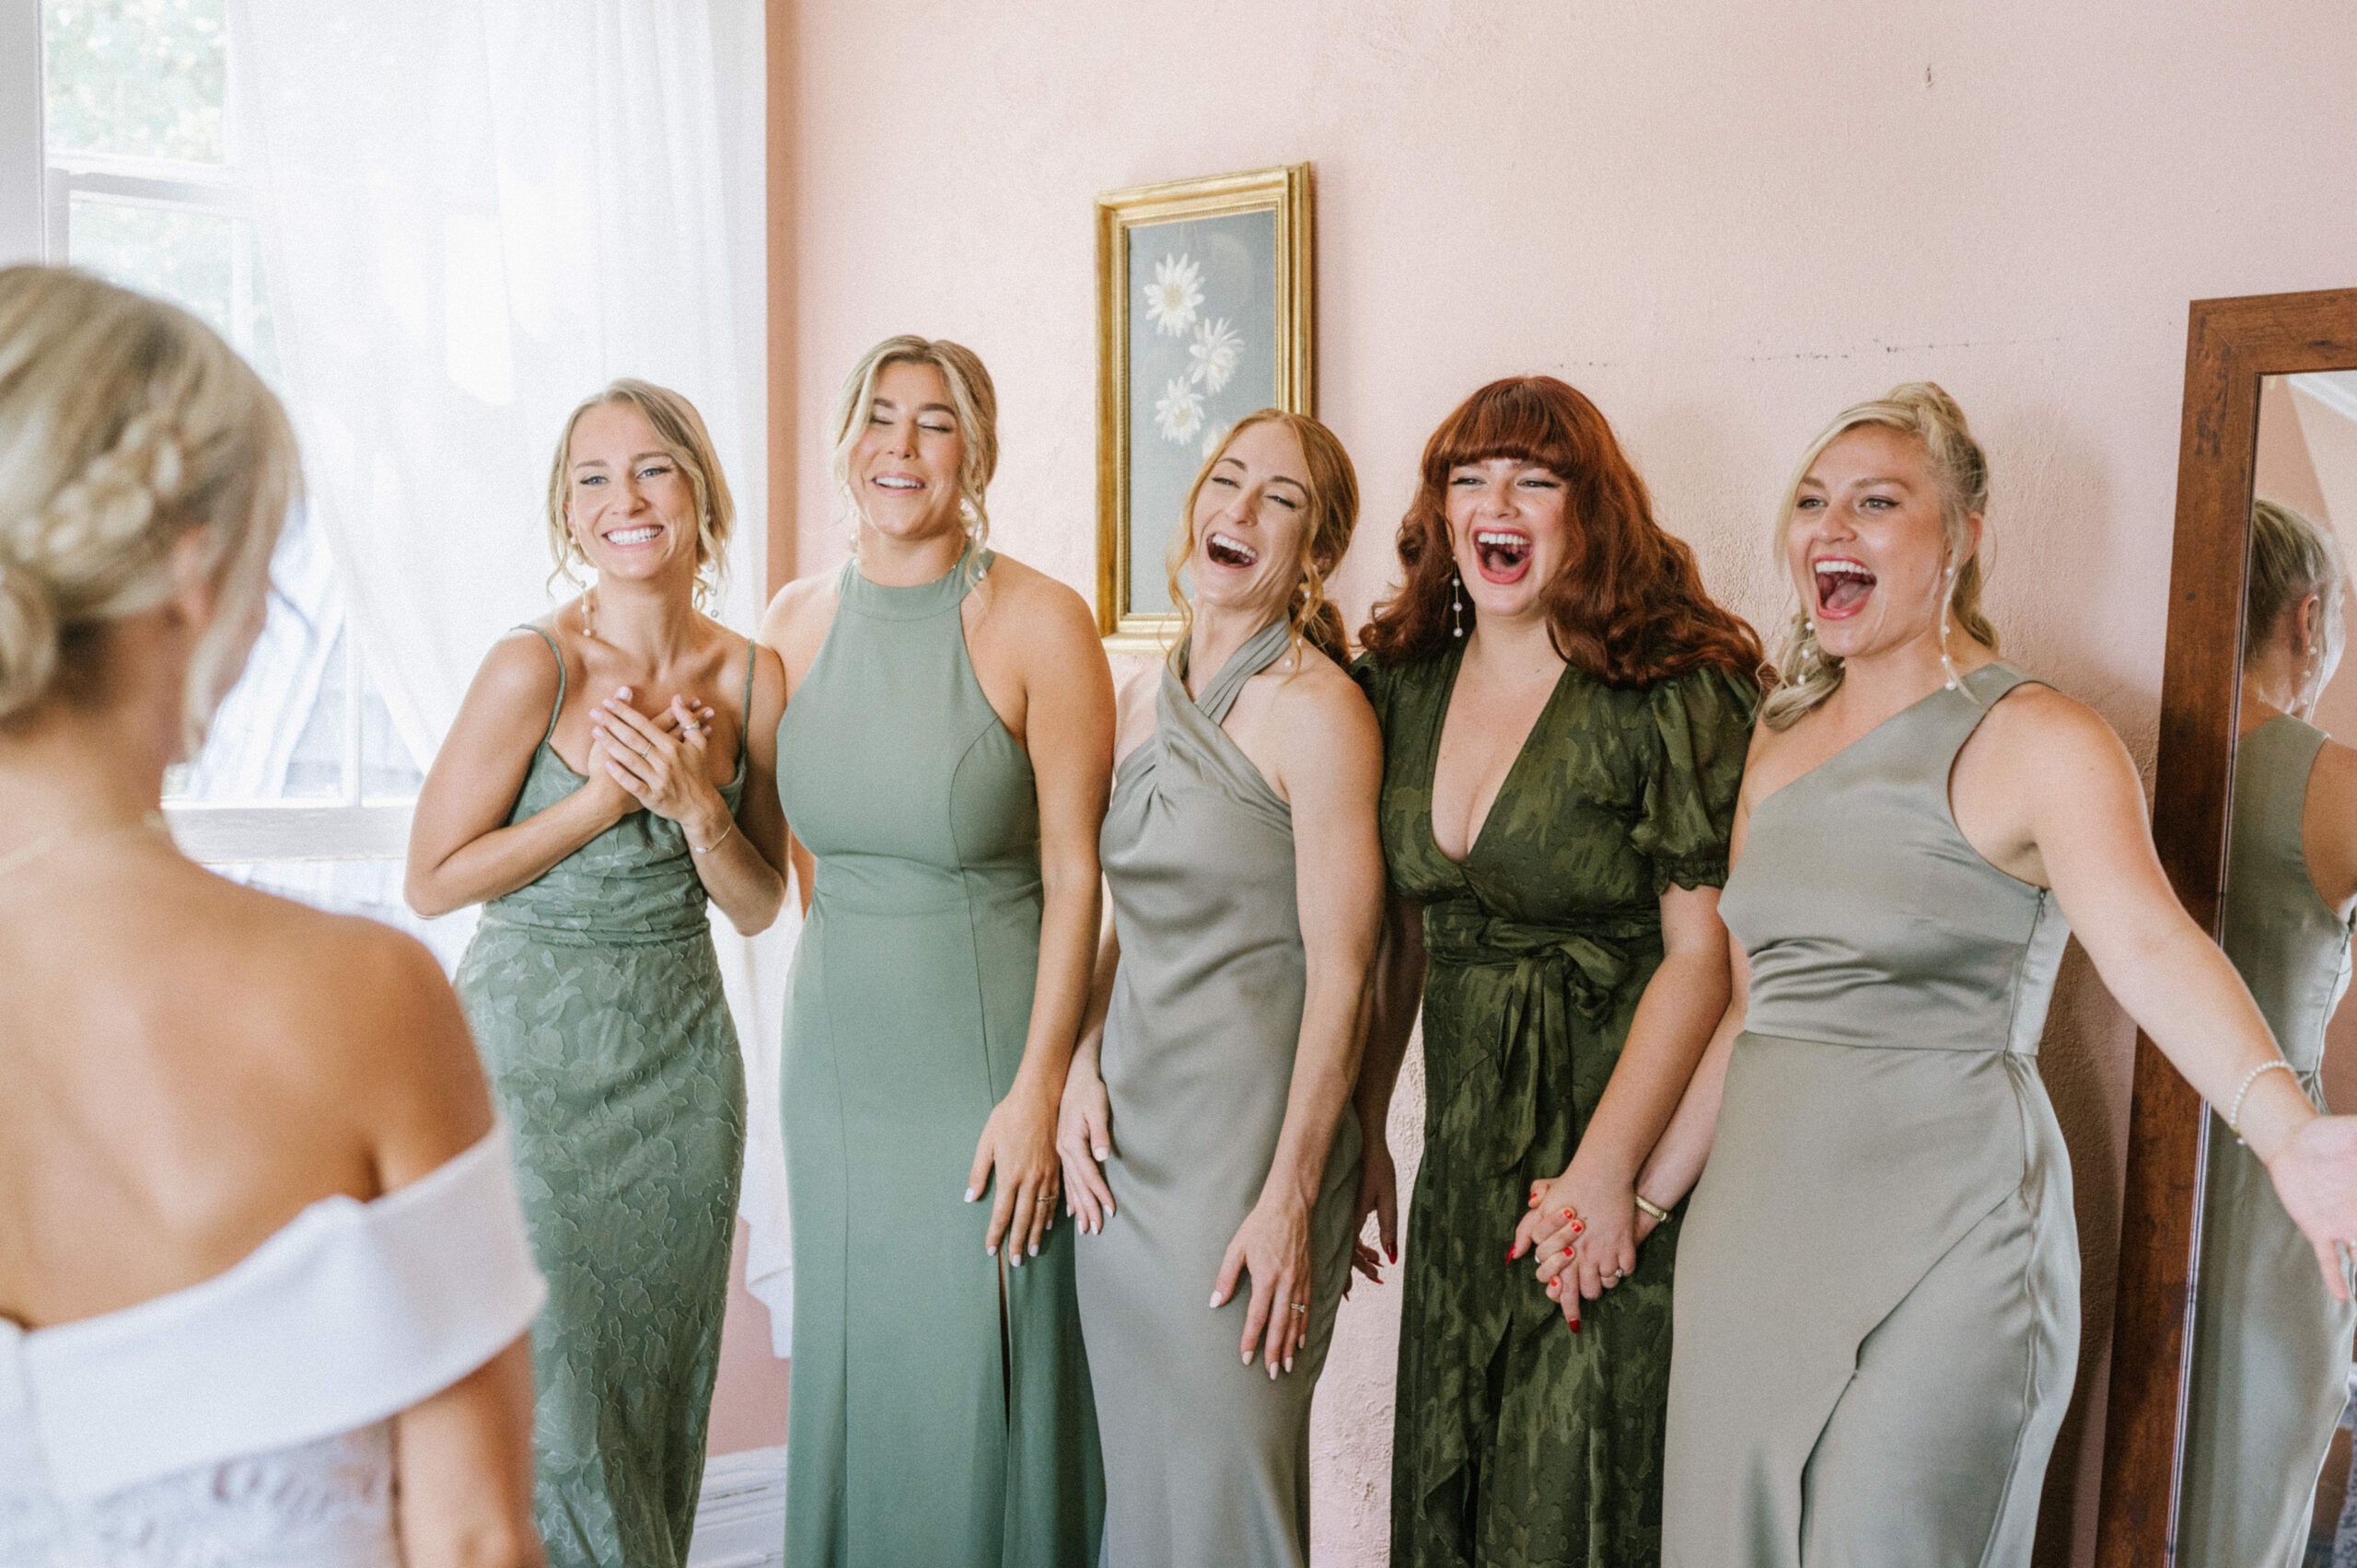 The bridesmaids, in various shades of green, react to seeing the bride in her dress at the Water Witch Club.